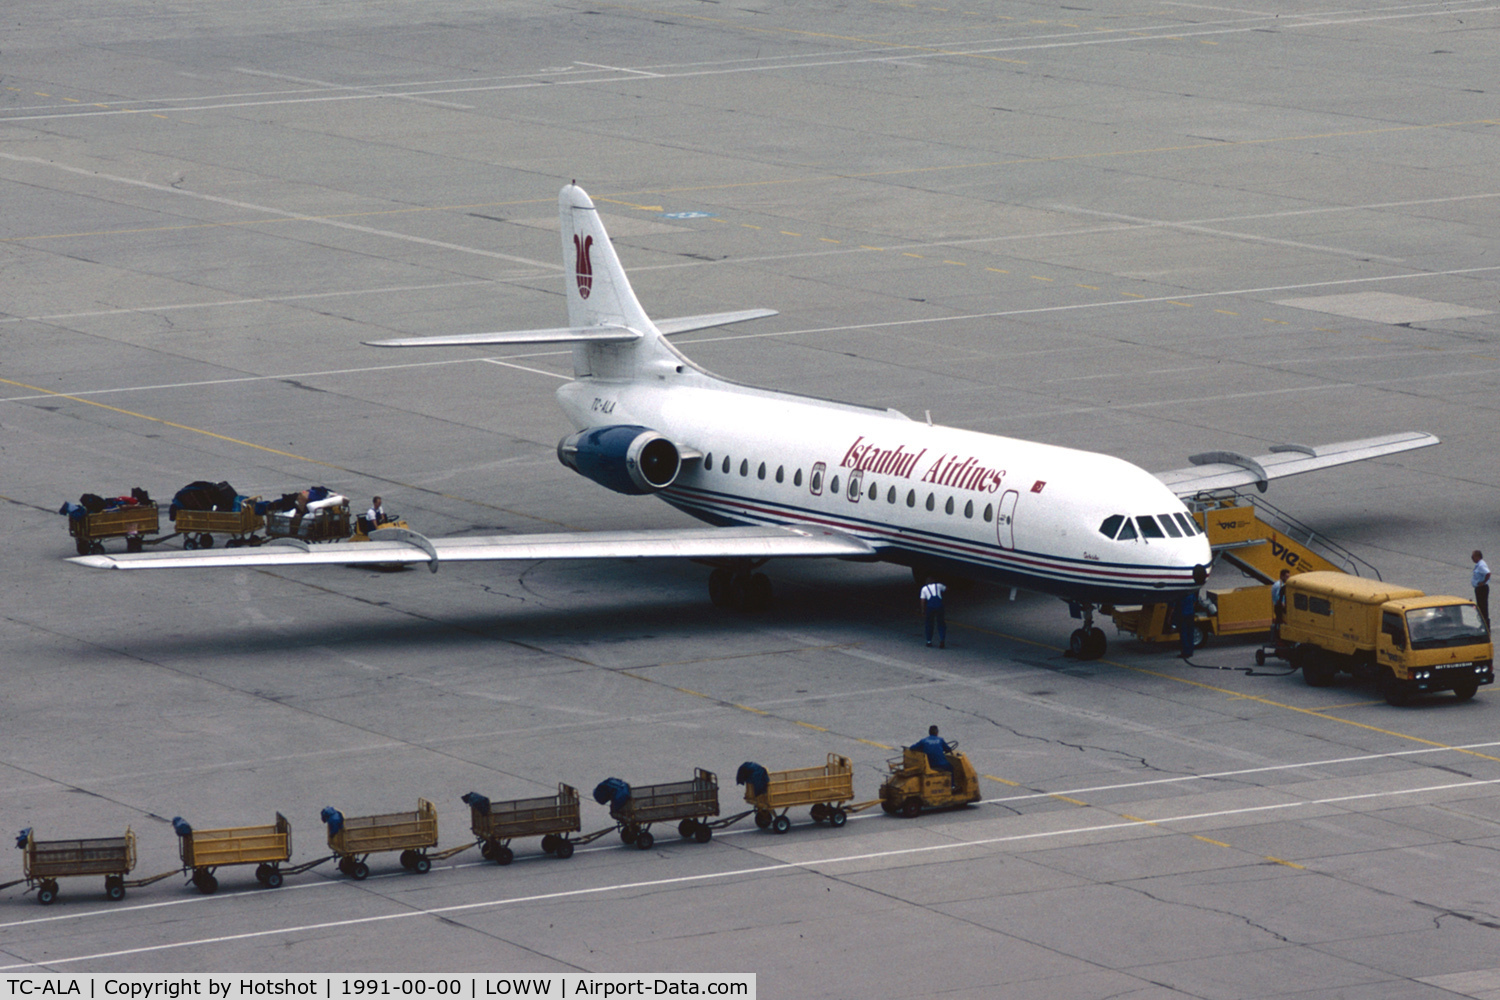 TC-ALA, 1969 Sud Aviation SE-210 Caravelle 10R C/N 250, Istanbul Airlines on a summer charter